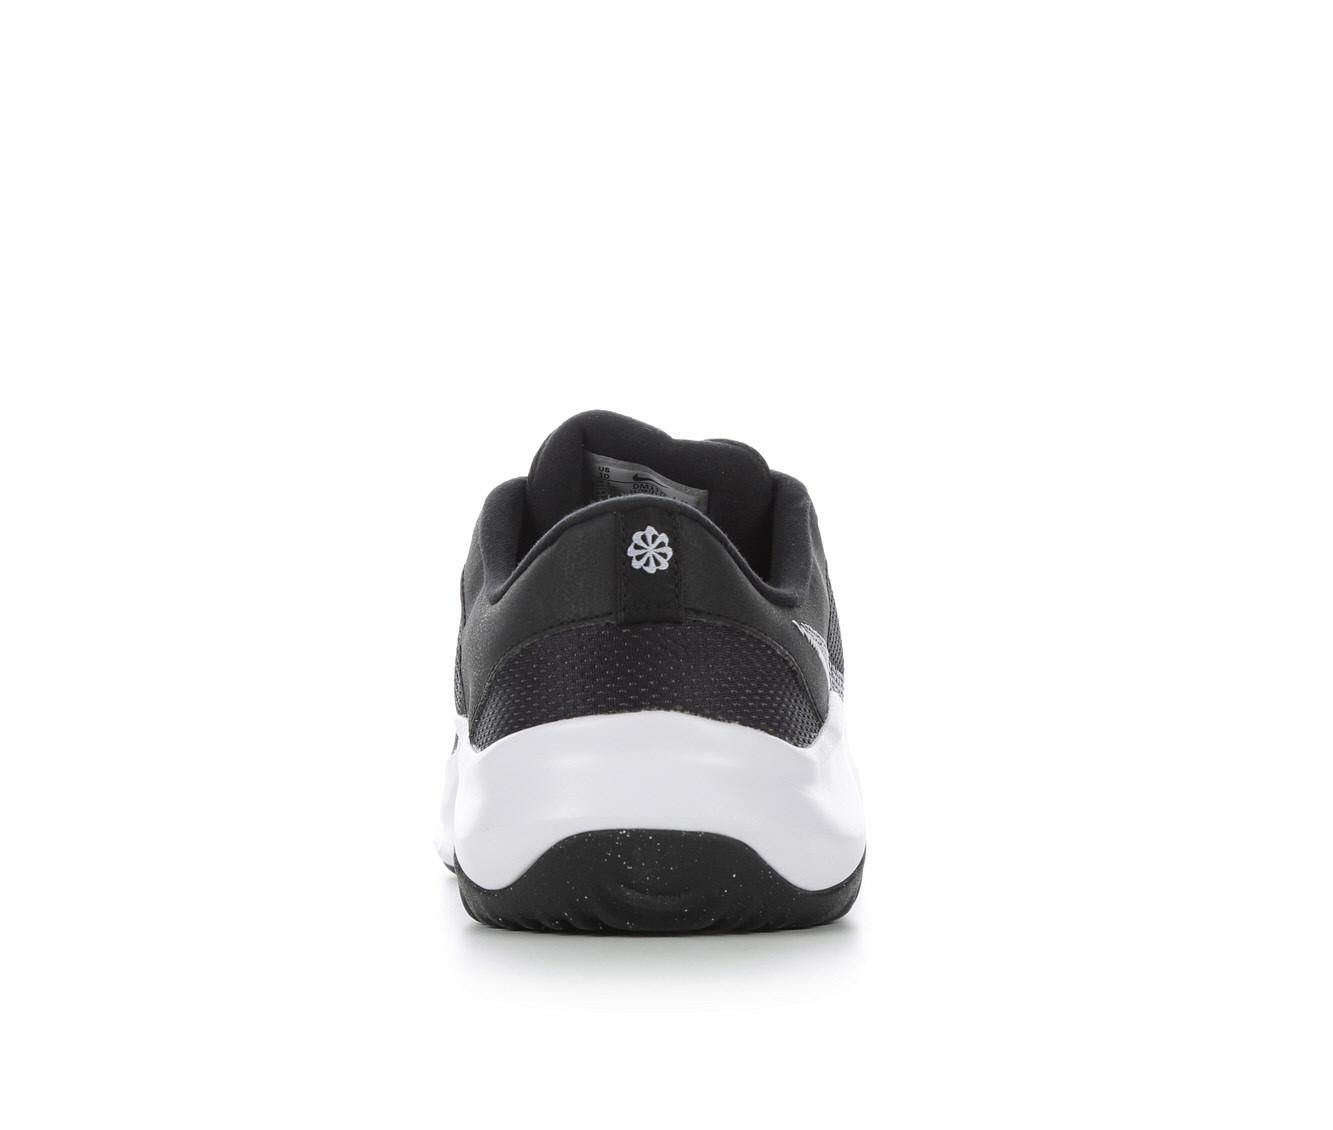 Men's Nike Legend Essential 3 Sustainable Training Shoes